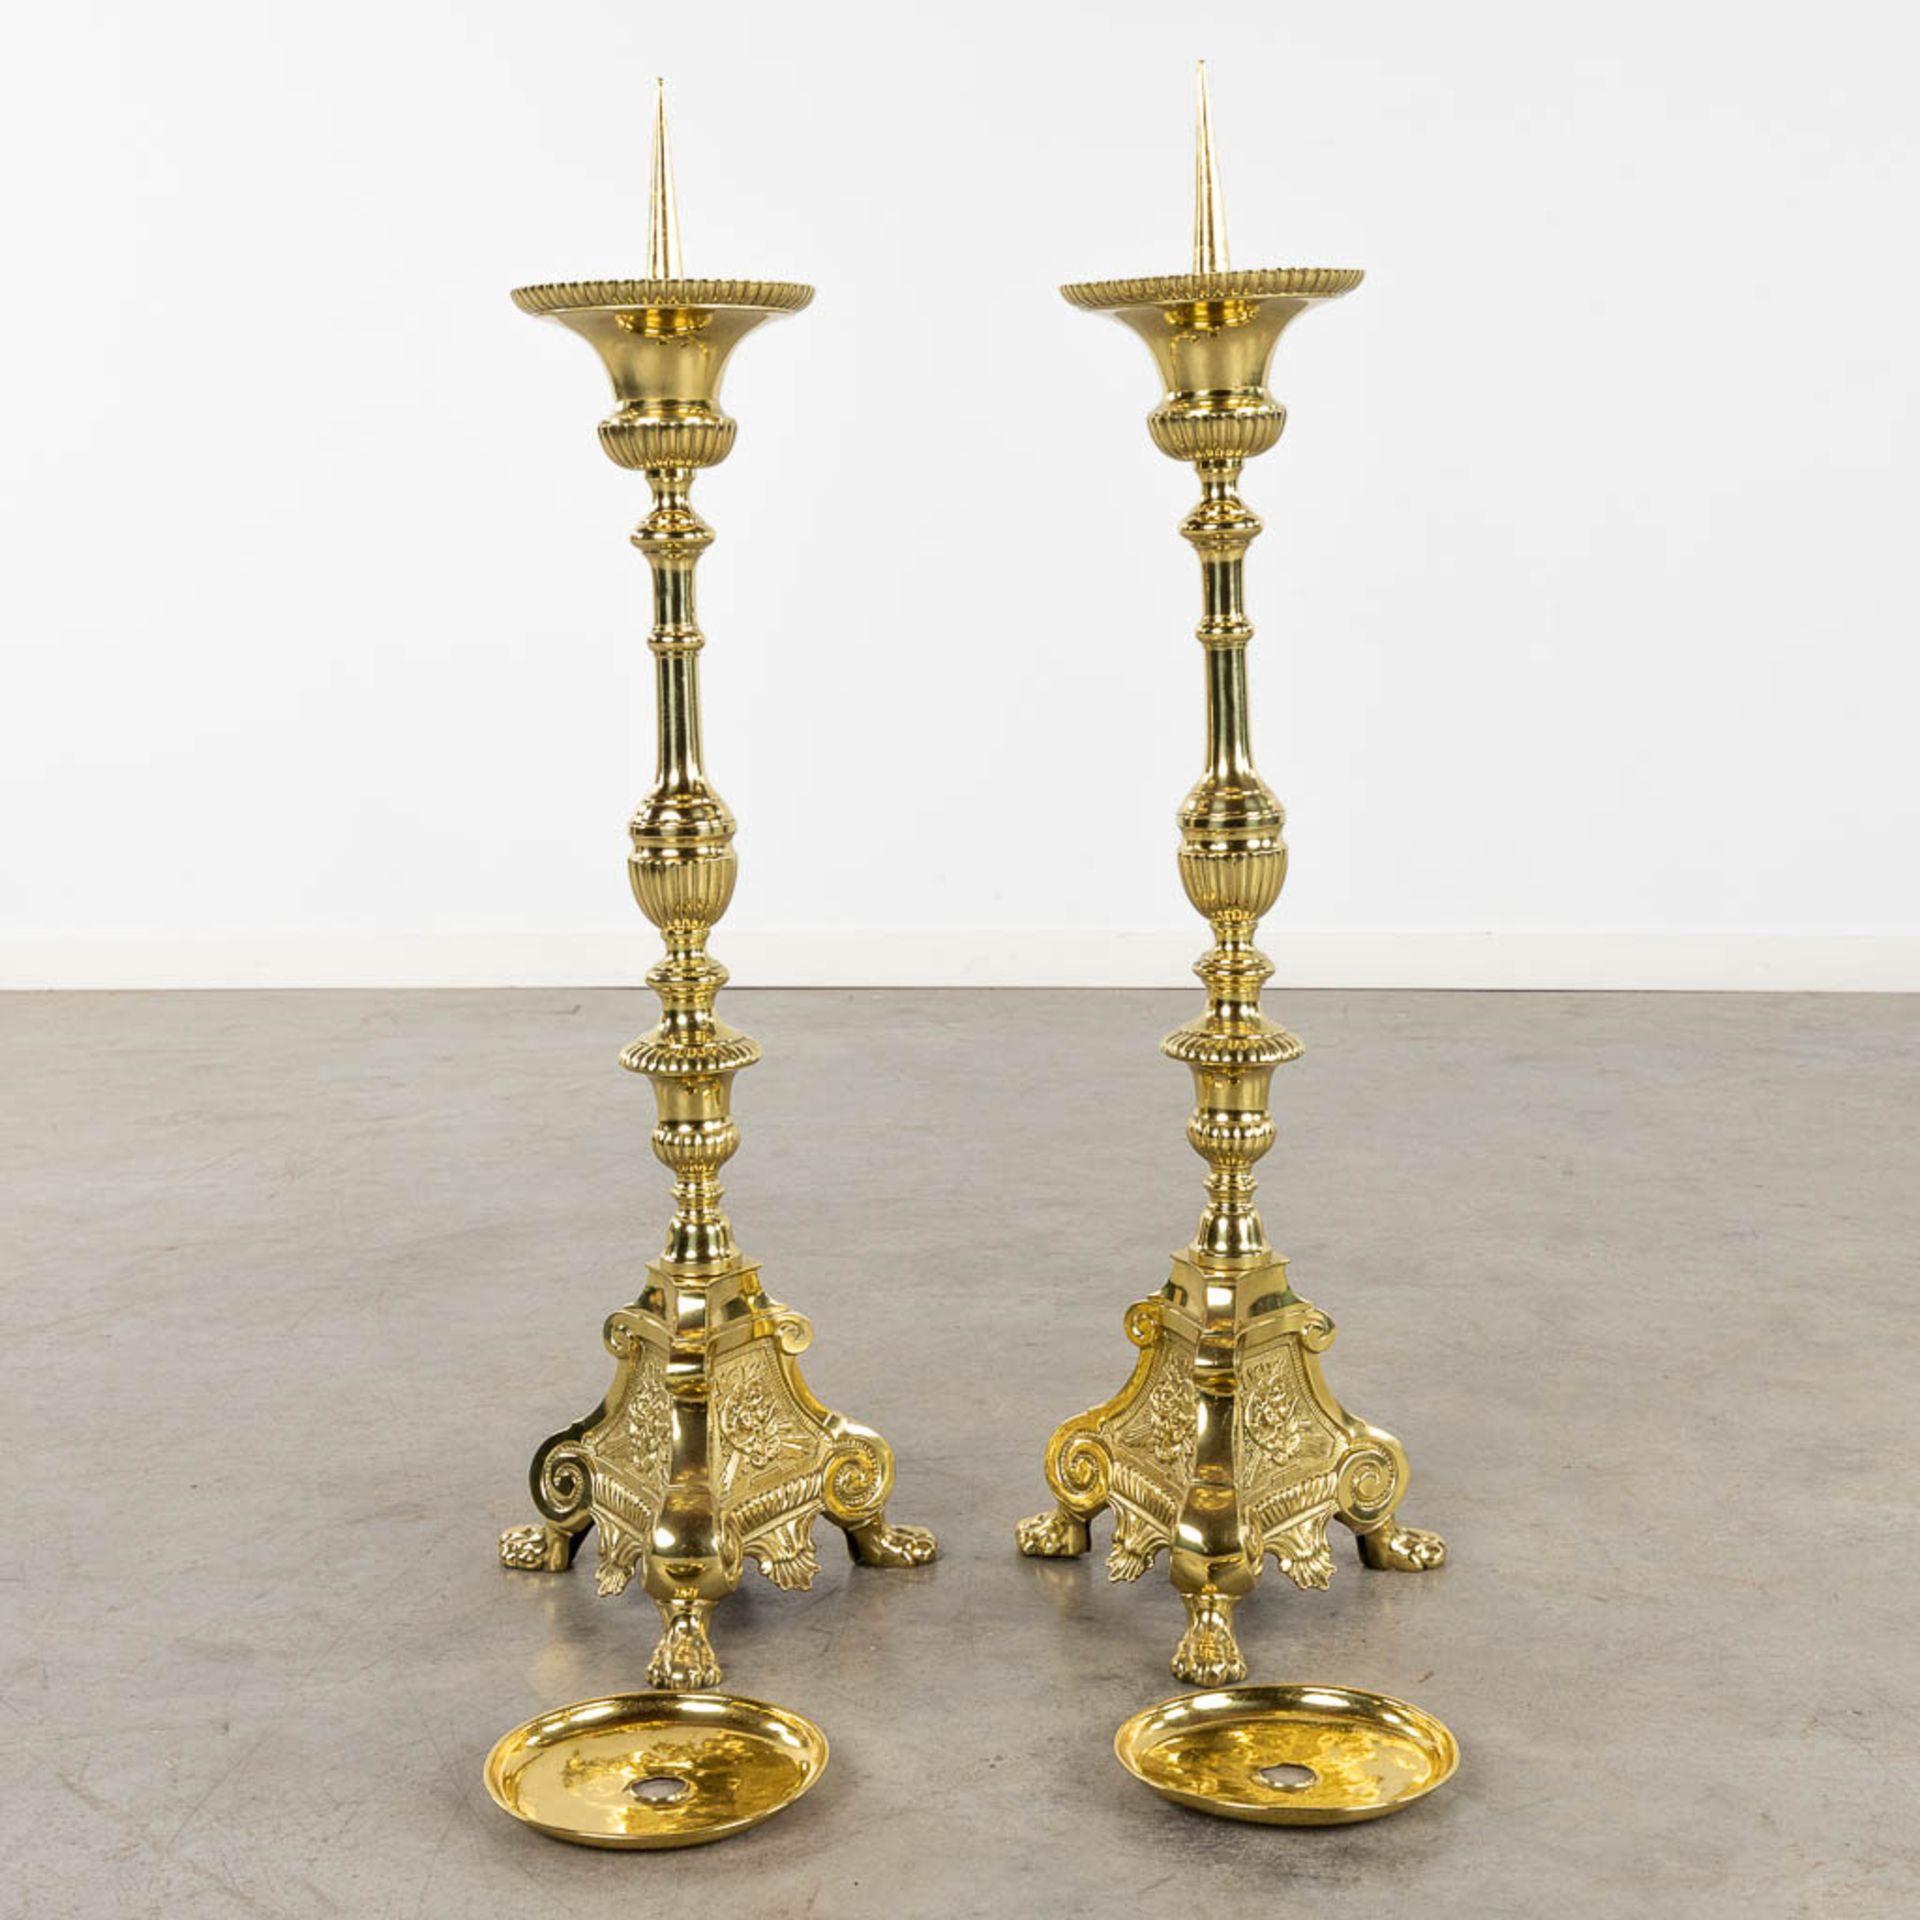 A pair of church candlesticks or candle holders polished bronze. 19th C. (D:24 x W:27 x H:88 cm) - Image 7 of 15